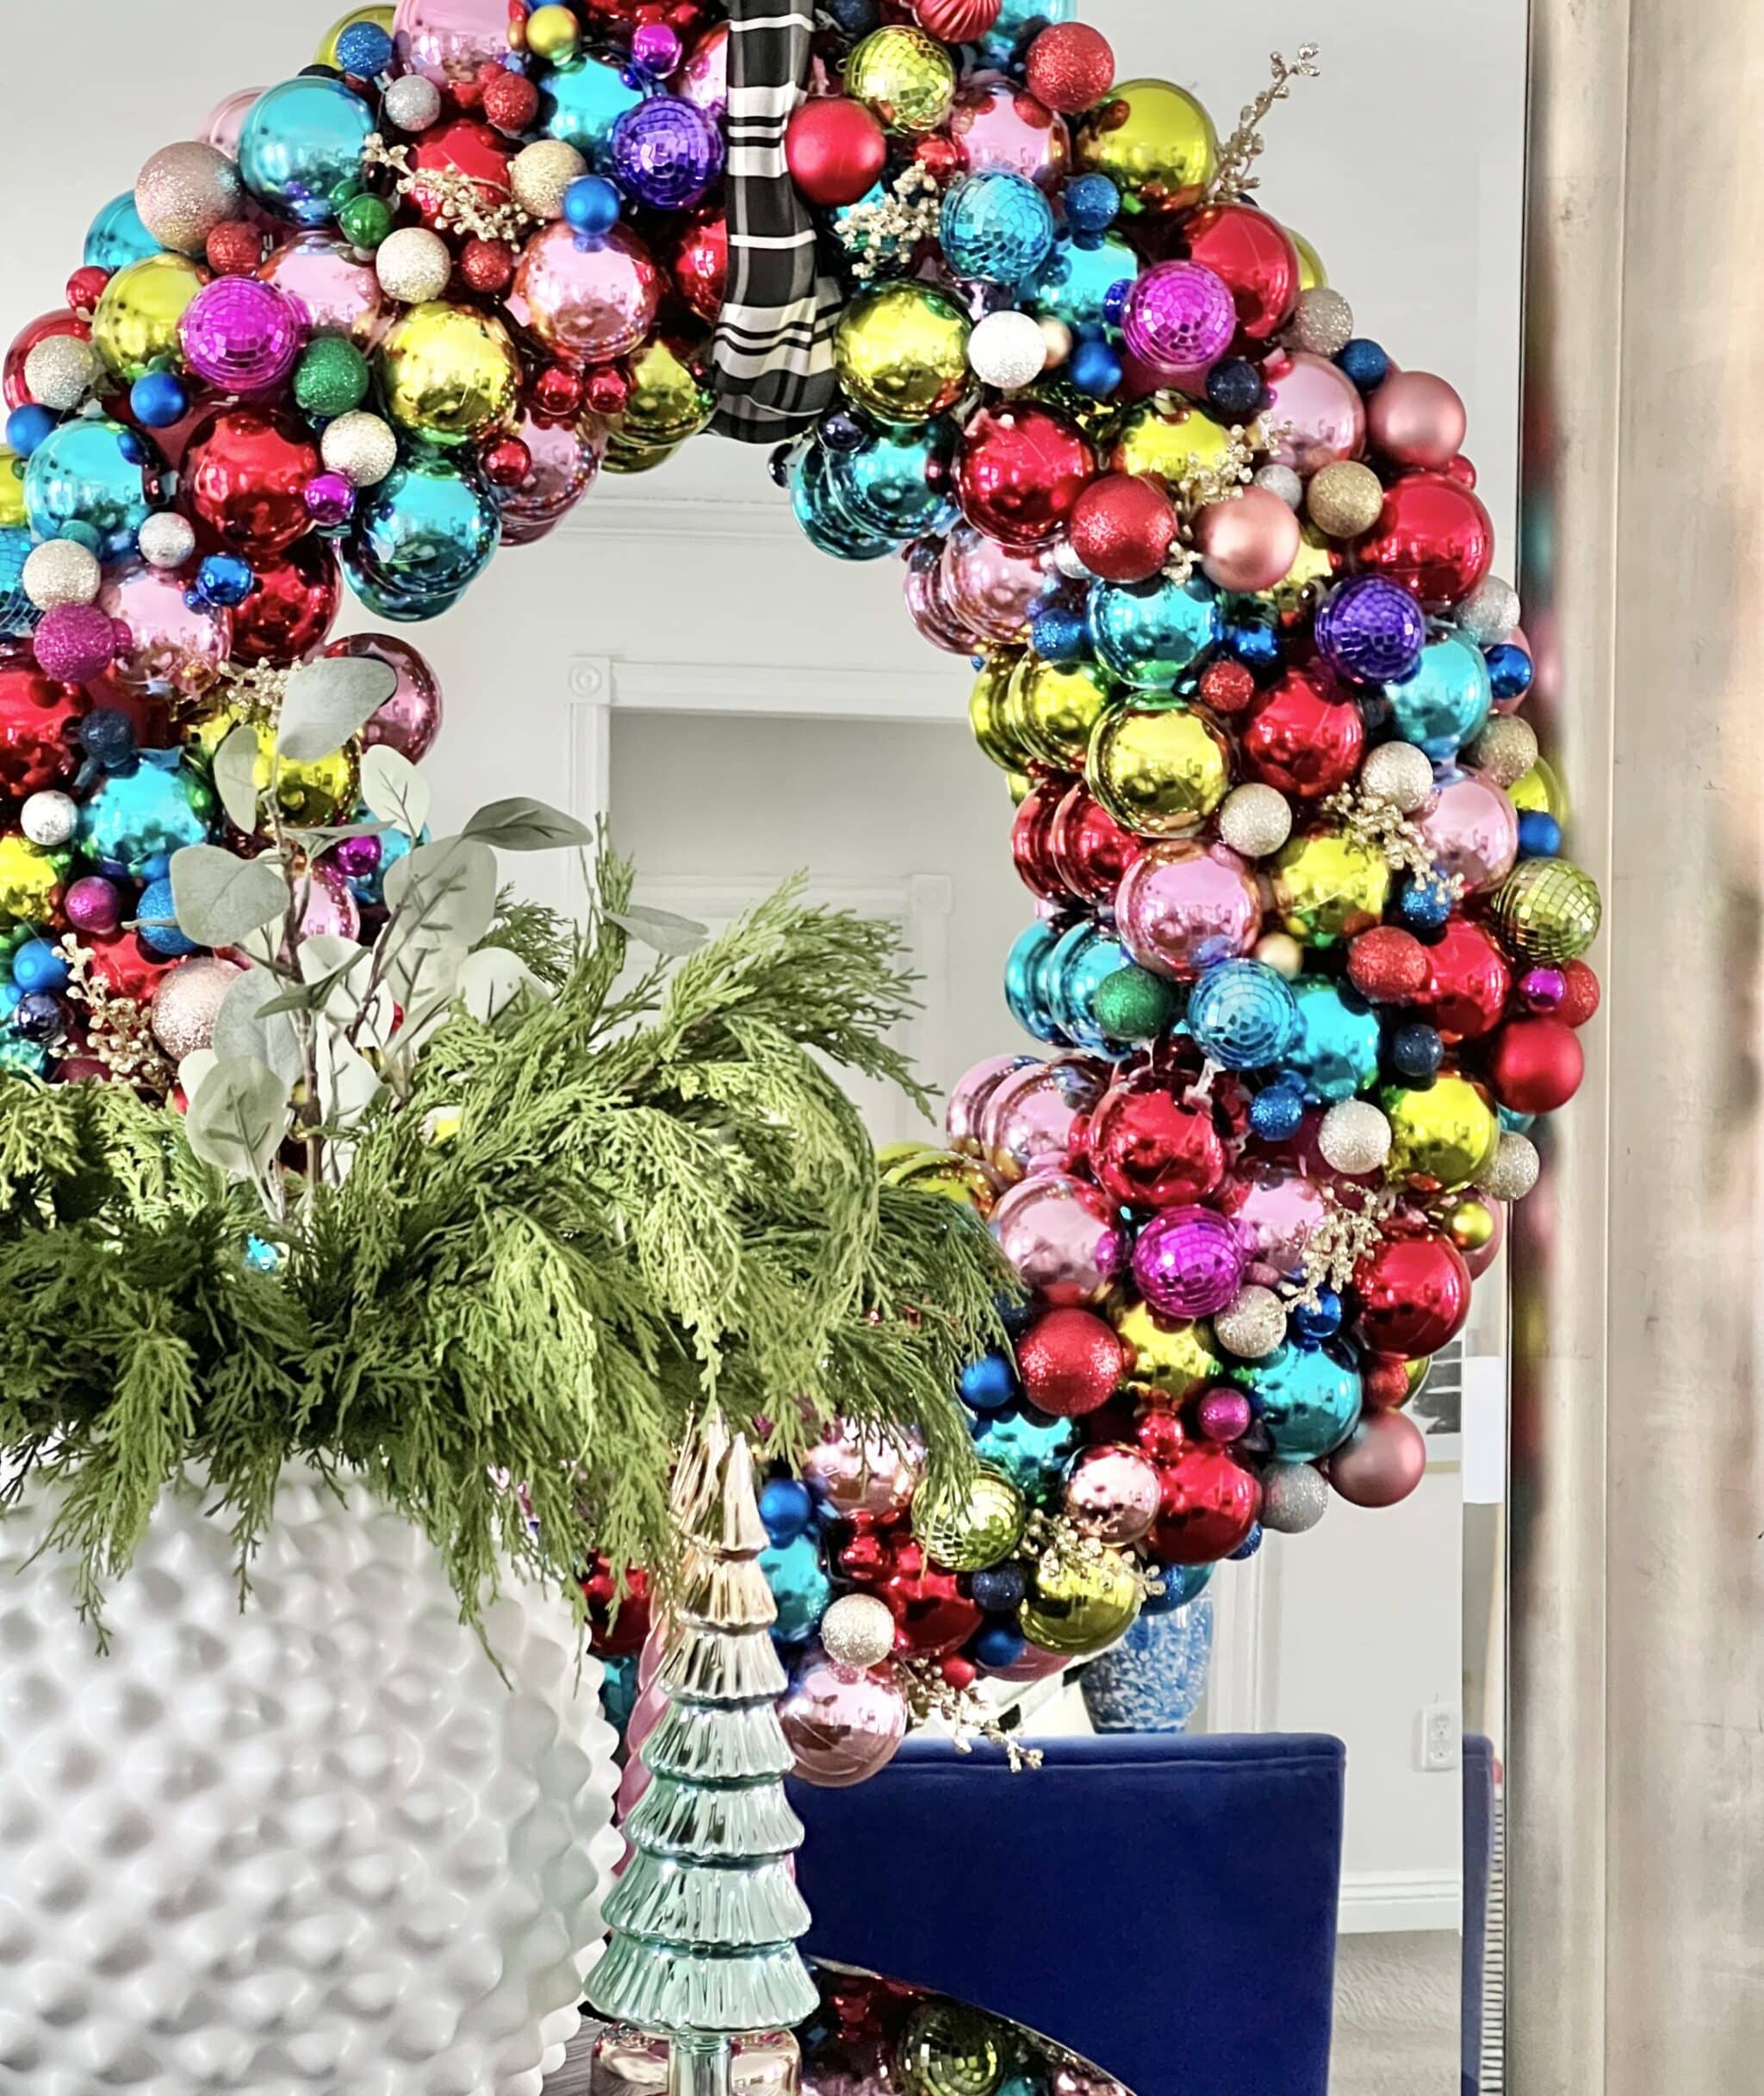 How to Make a DIY Pool Noodle Christmas Ornament Wreath